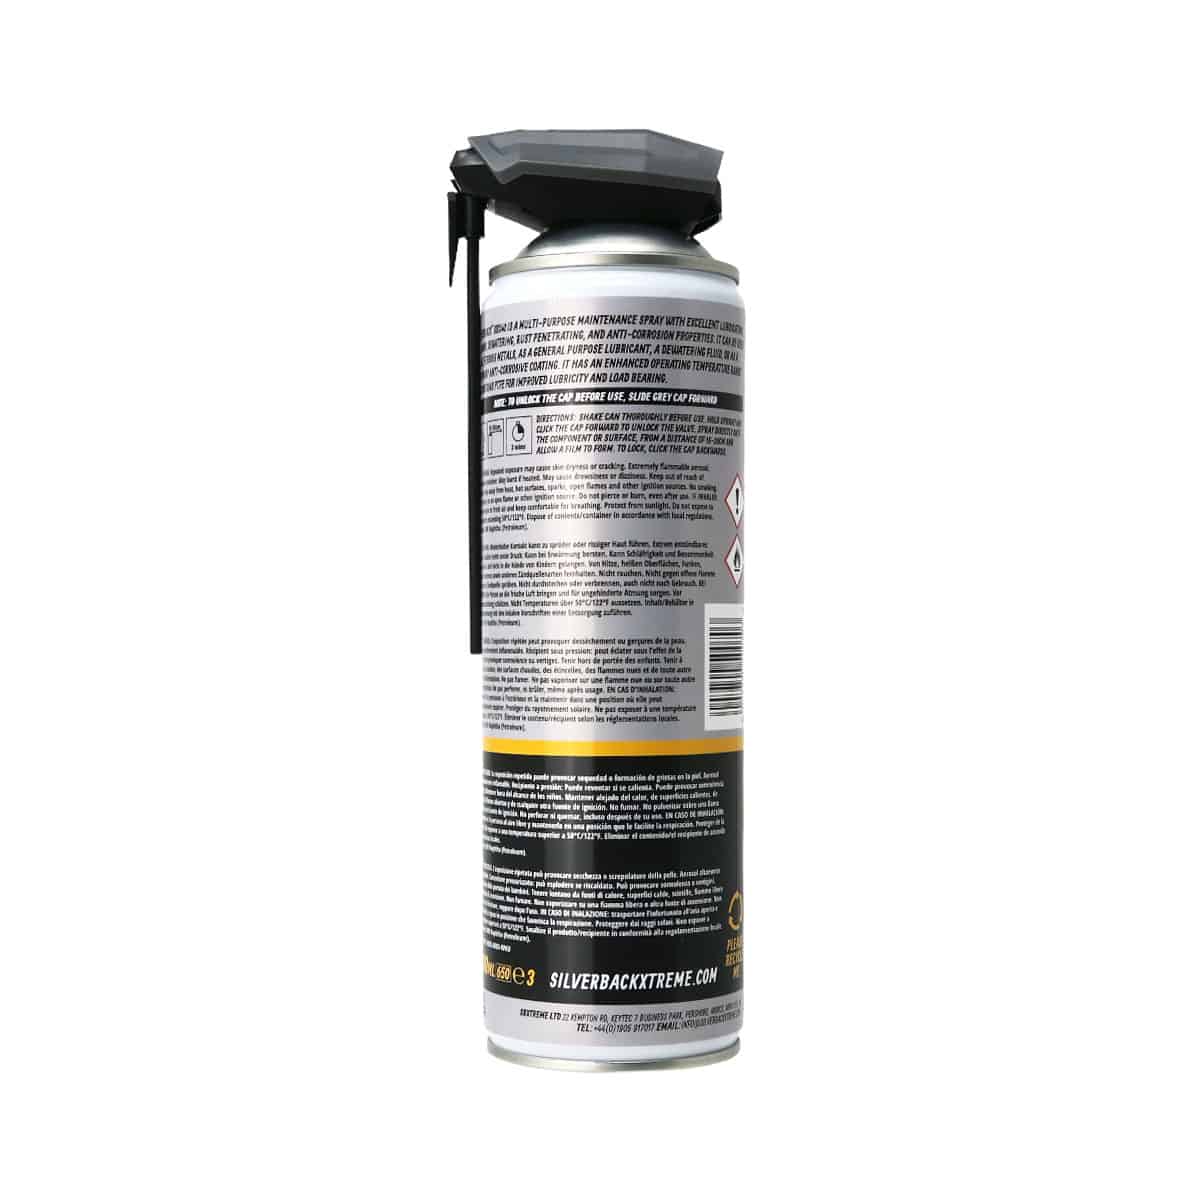 Silverback Maintenance Spray: A general purpose maintenance spray that is great at displacing water instructions